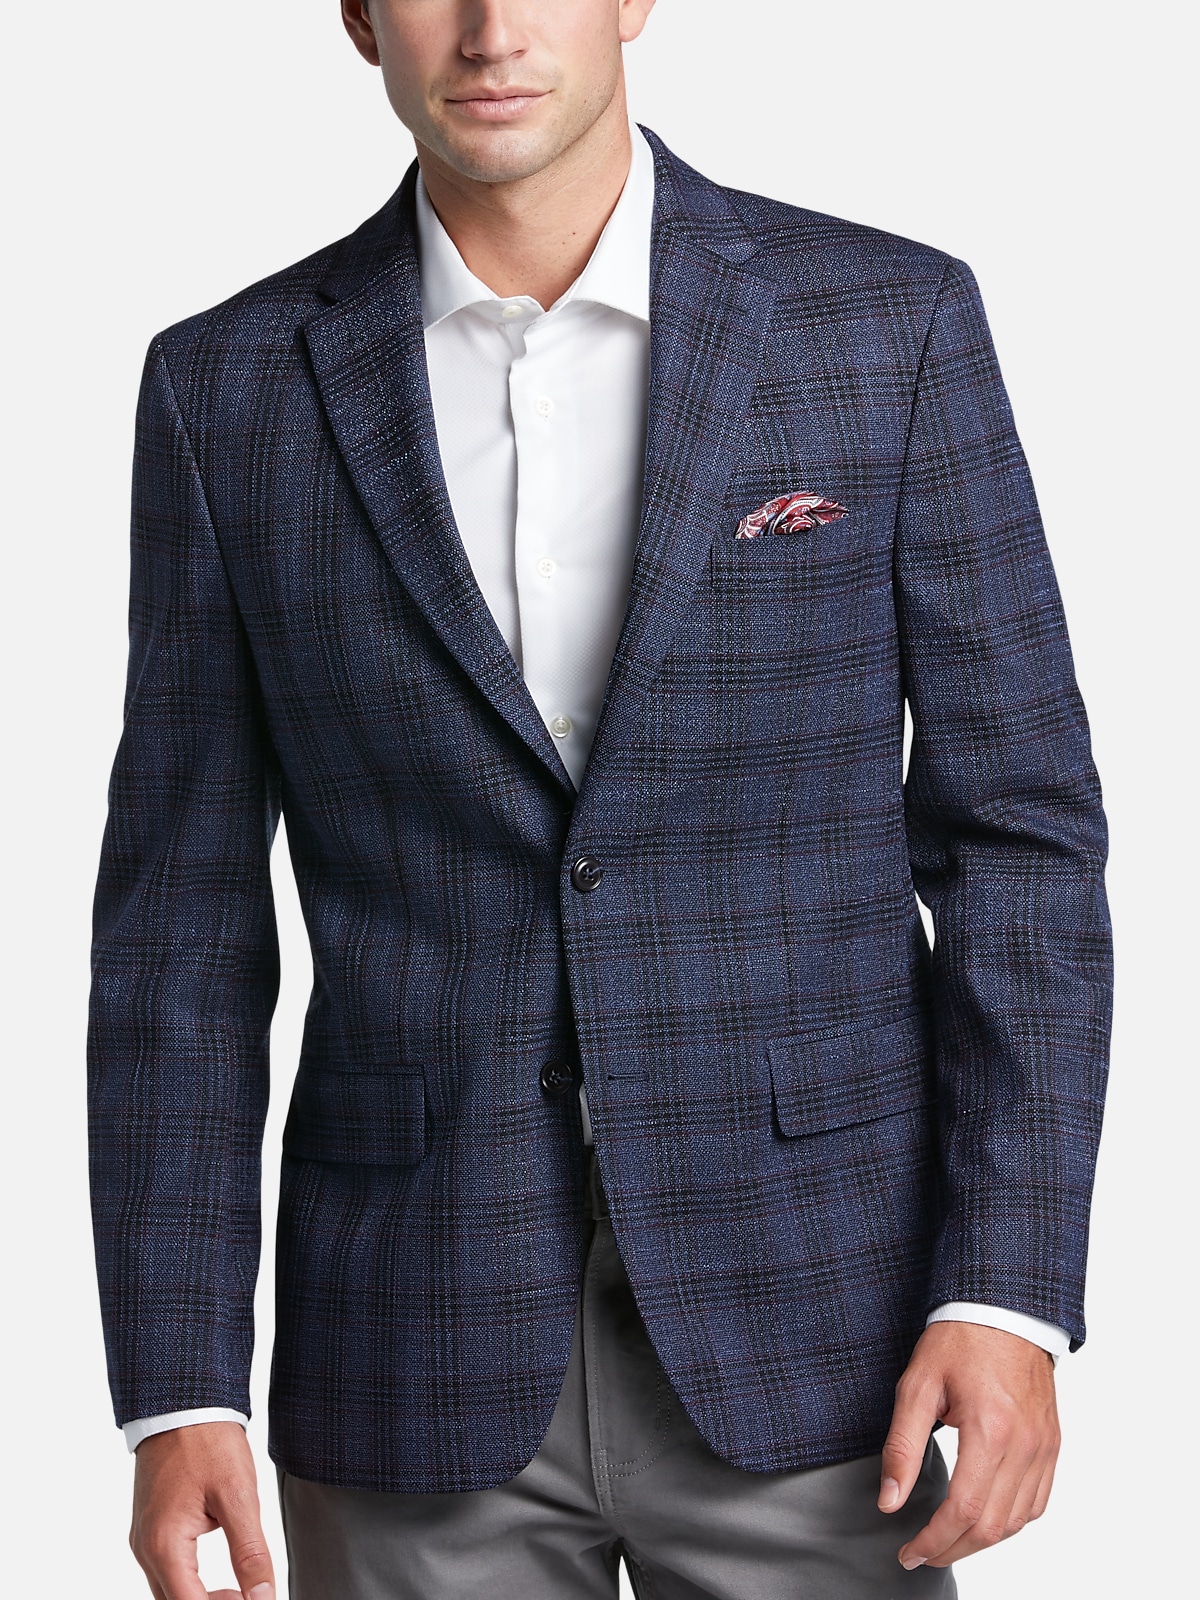 https://image.menswearhouse.com/is/image/TMW/TMW_15X3_67_TOMMY_HILFIGER_SPORT_COATS_BLUE_PLAID_MAIN?imPolicy=pdp-zoom-mob